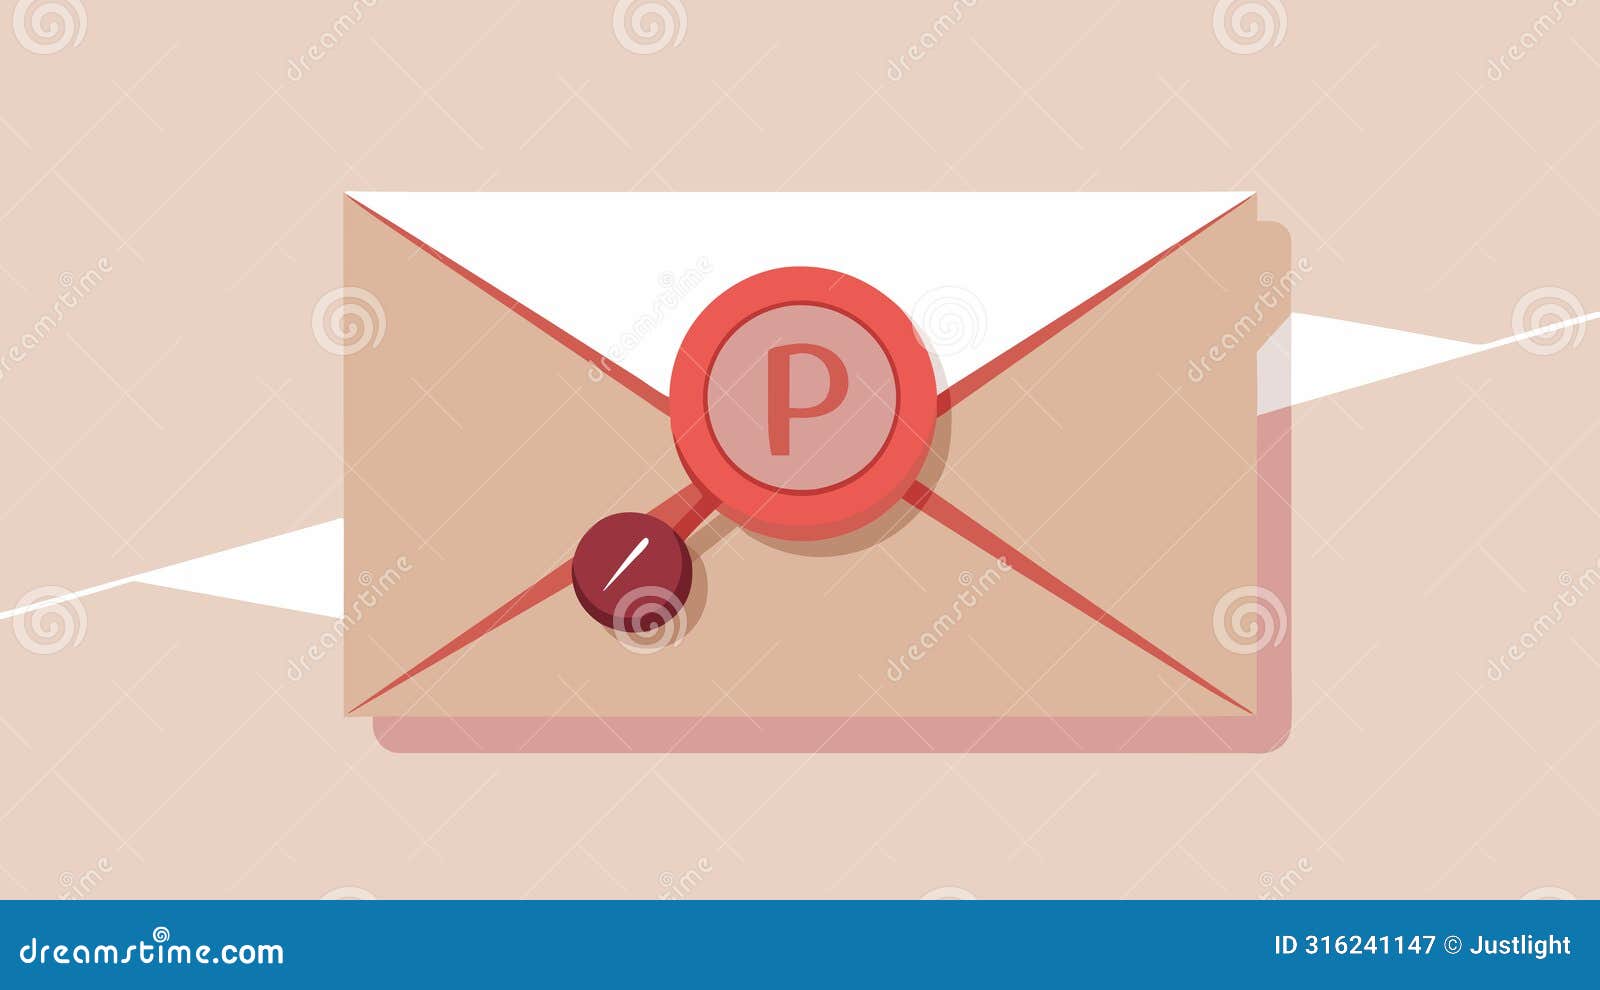 the envelope is carefully sealed with a stamp p in the corner ready to embark on its journey to a faraway loved one